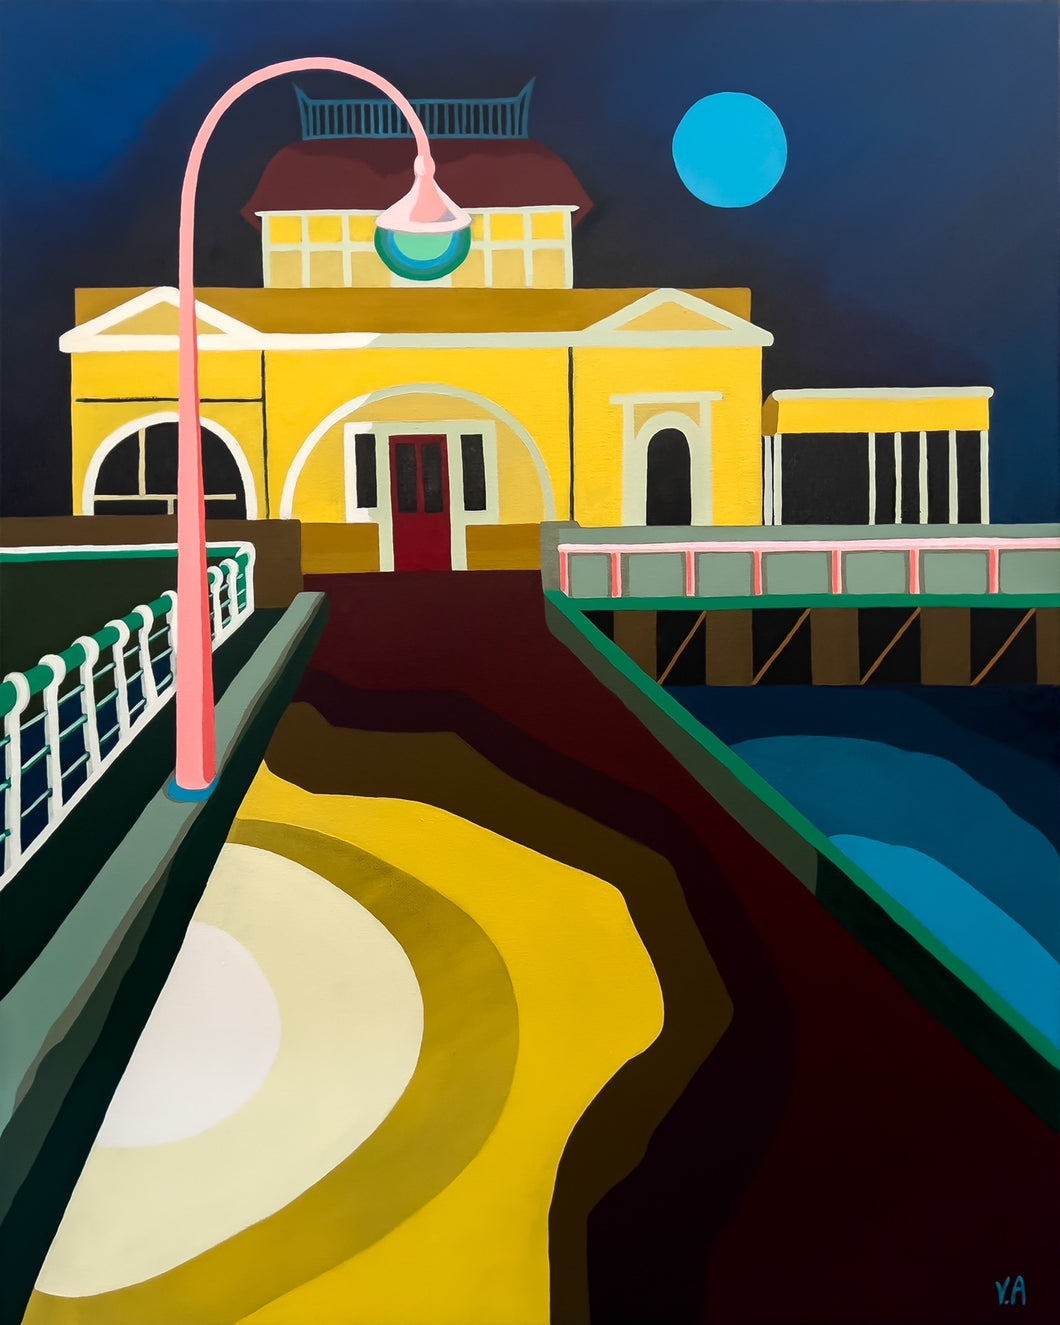 St Kilda pier and kiosk painted in a dramatic, stylised way.